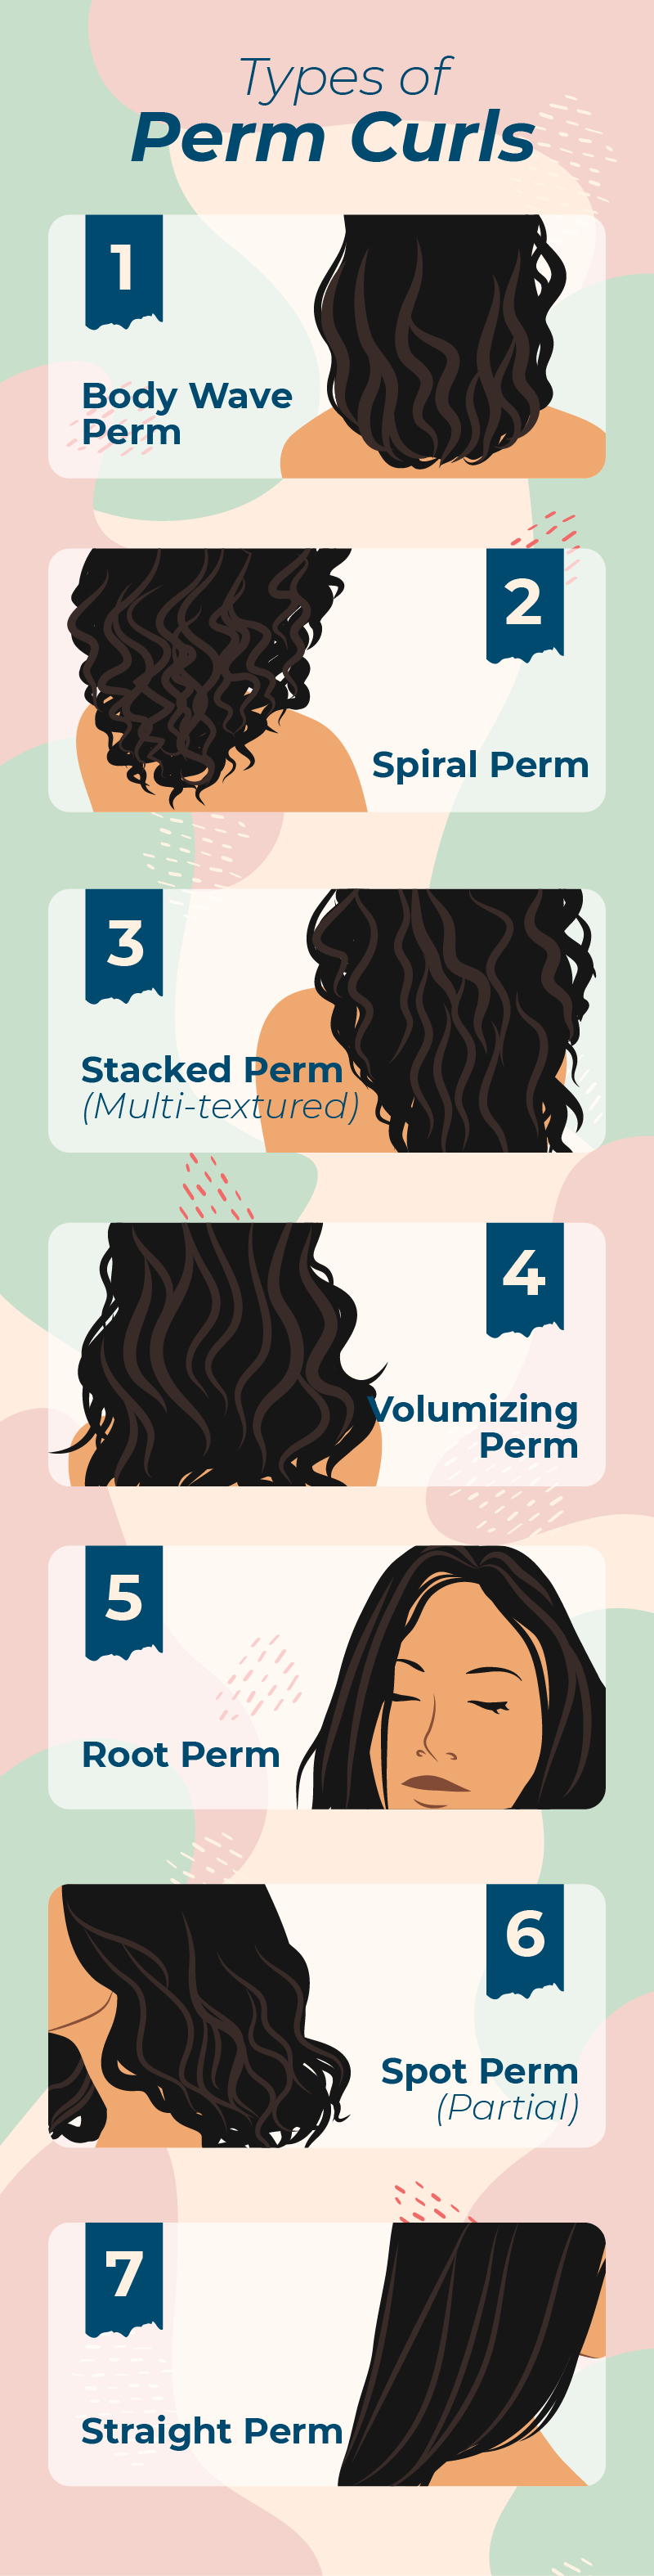 Types of perm curls illustrated for a piece on average perm costs